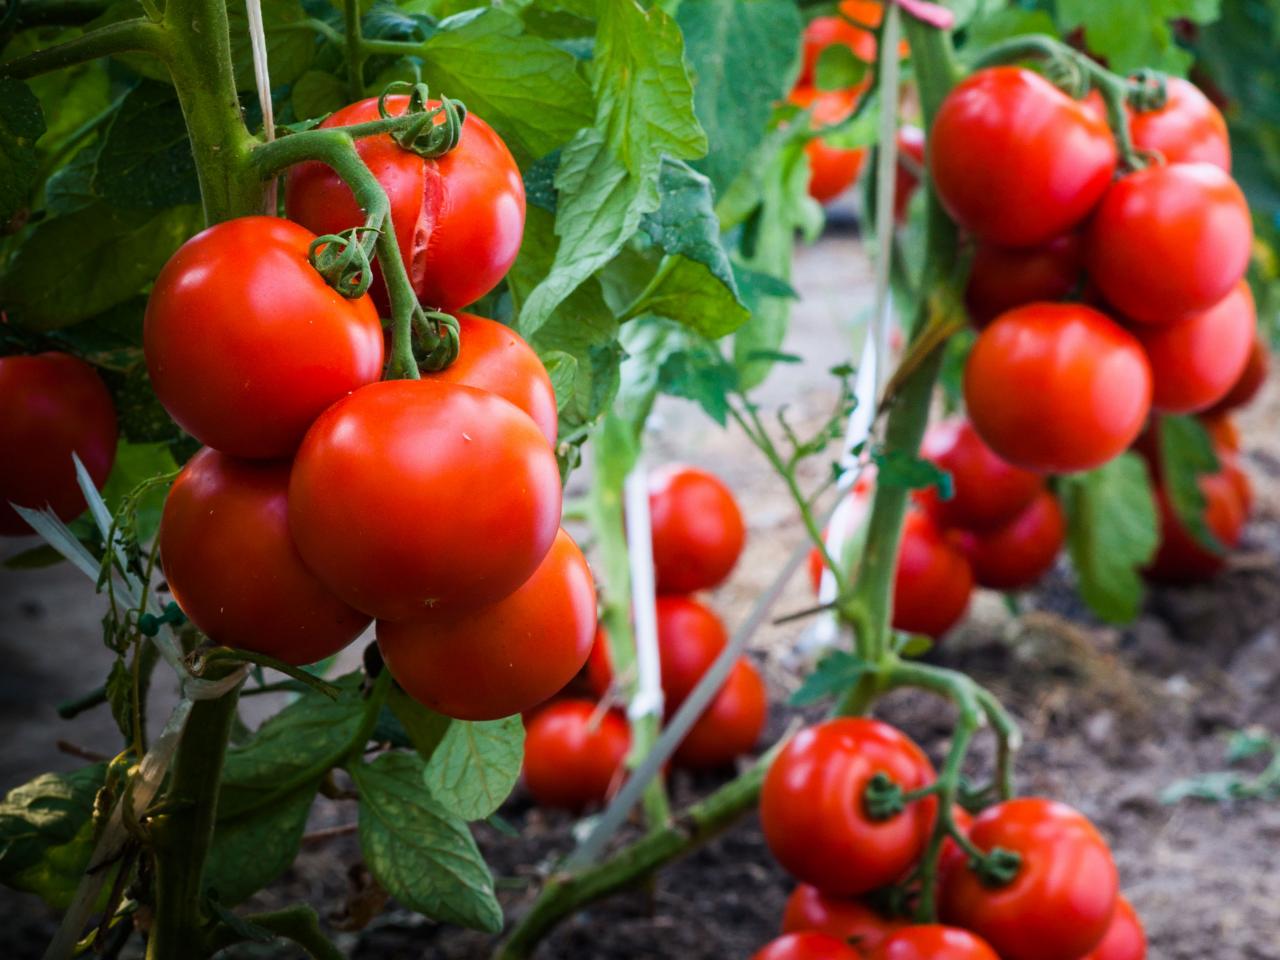 How to Avoid Late Blight on Tomatoes